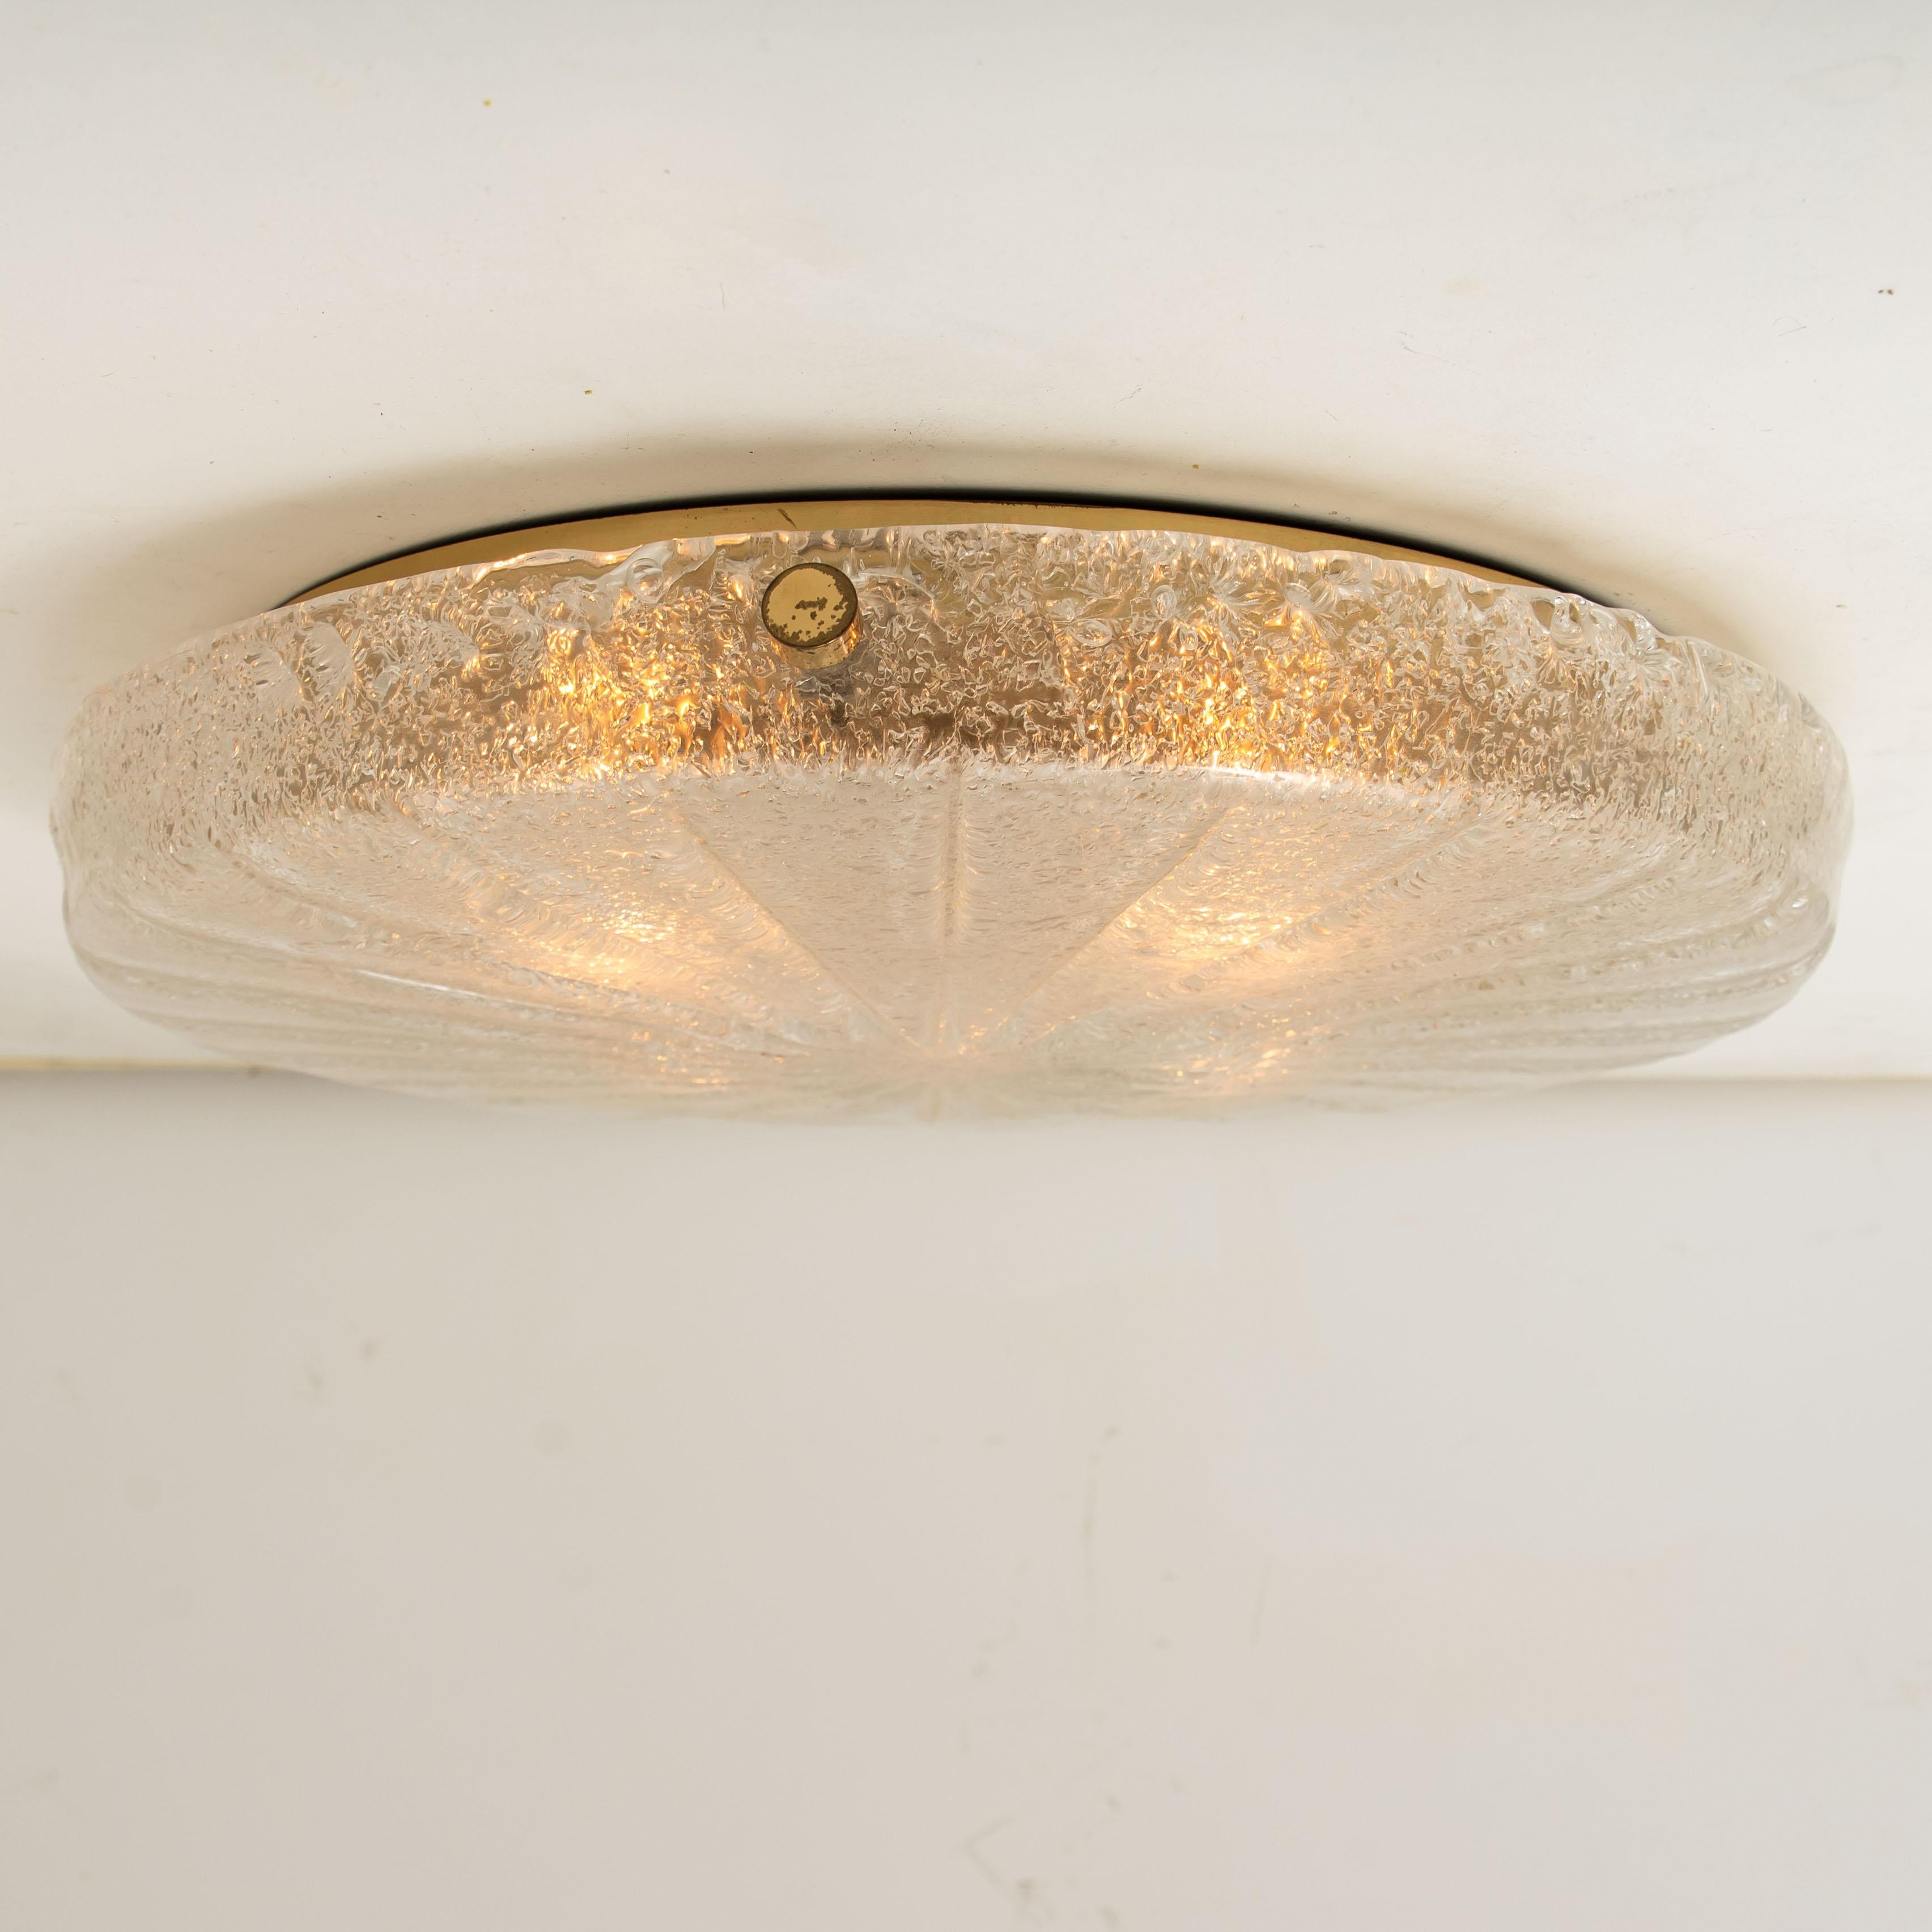 A wonderful round ice glass flush mount by Hillebrand, Germany, 1970s.
Thick sunburst surface pattern on a brass base. Illuminates beautifully.
Can also work for impressive wall light! 

High quality and in very good condition. Cleaned,